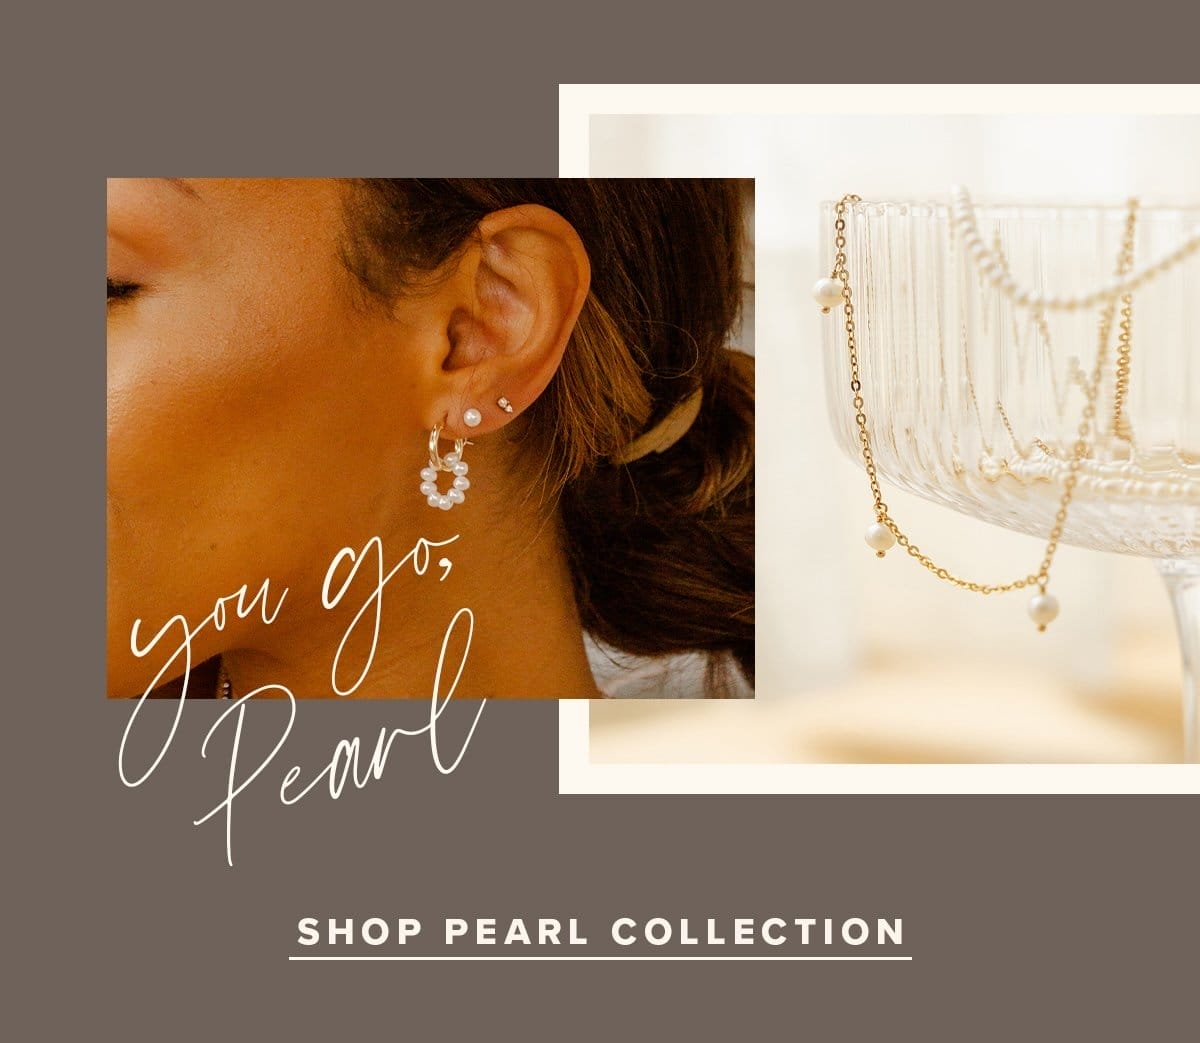 you go, pearl - pearl collection